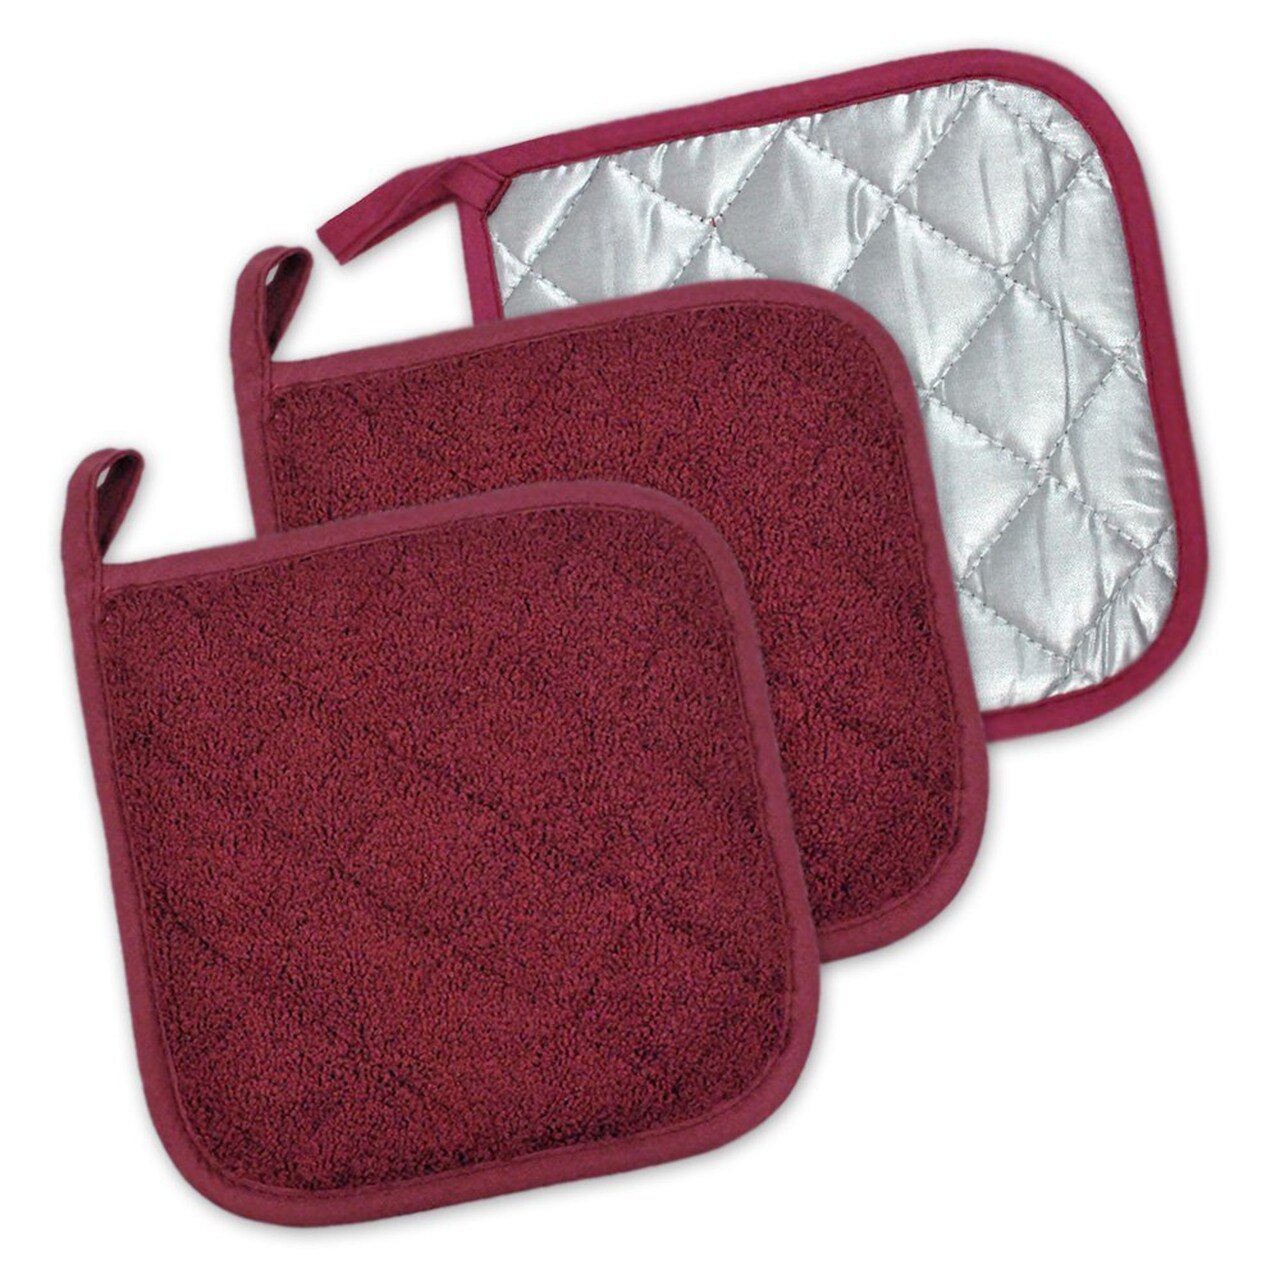 Contemporary Home Living Set of 3 Red and Silver Square Potholders 7